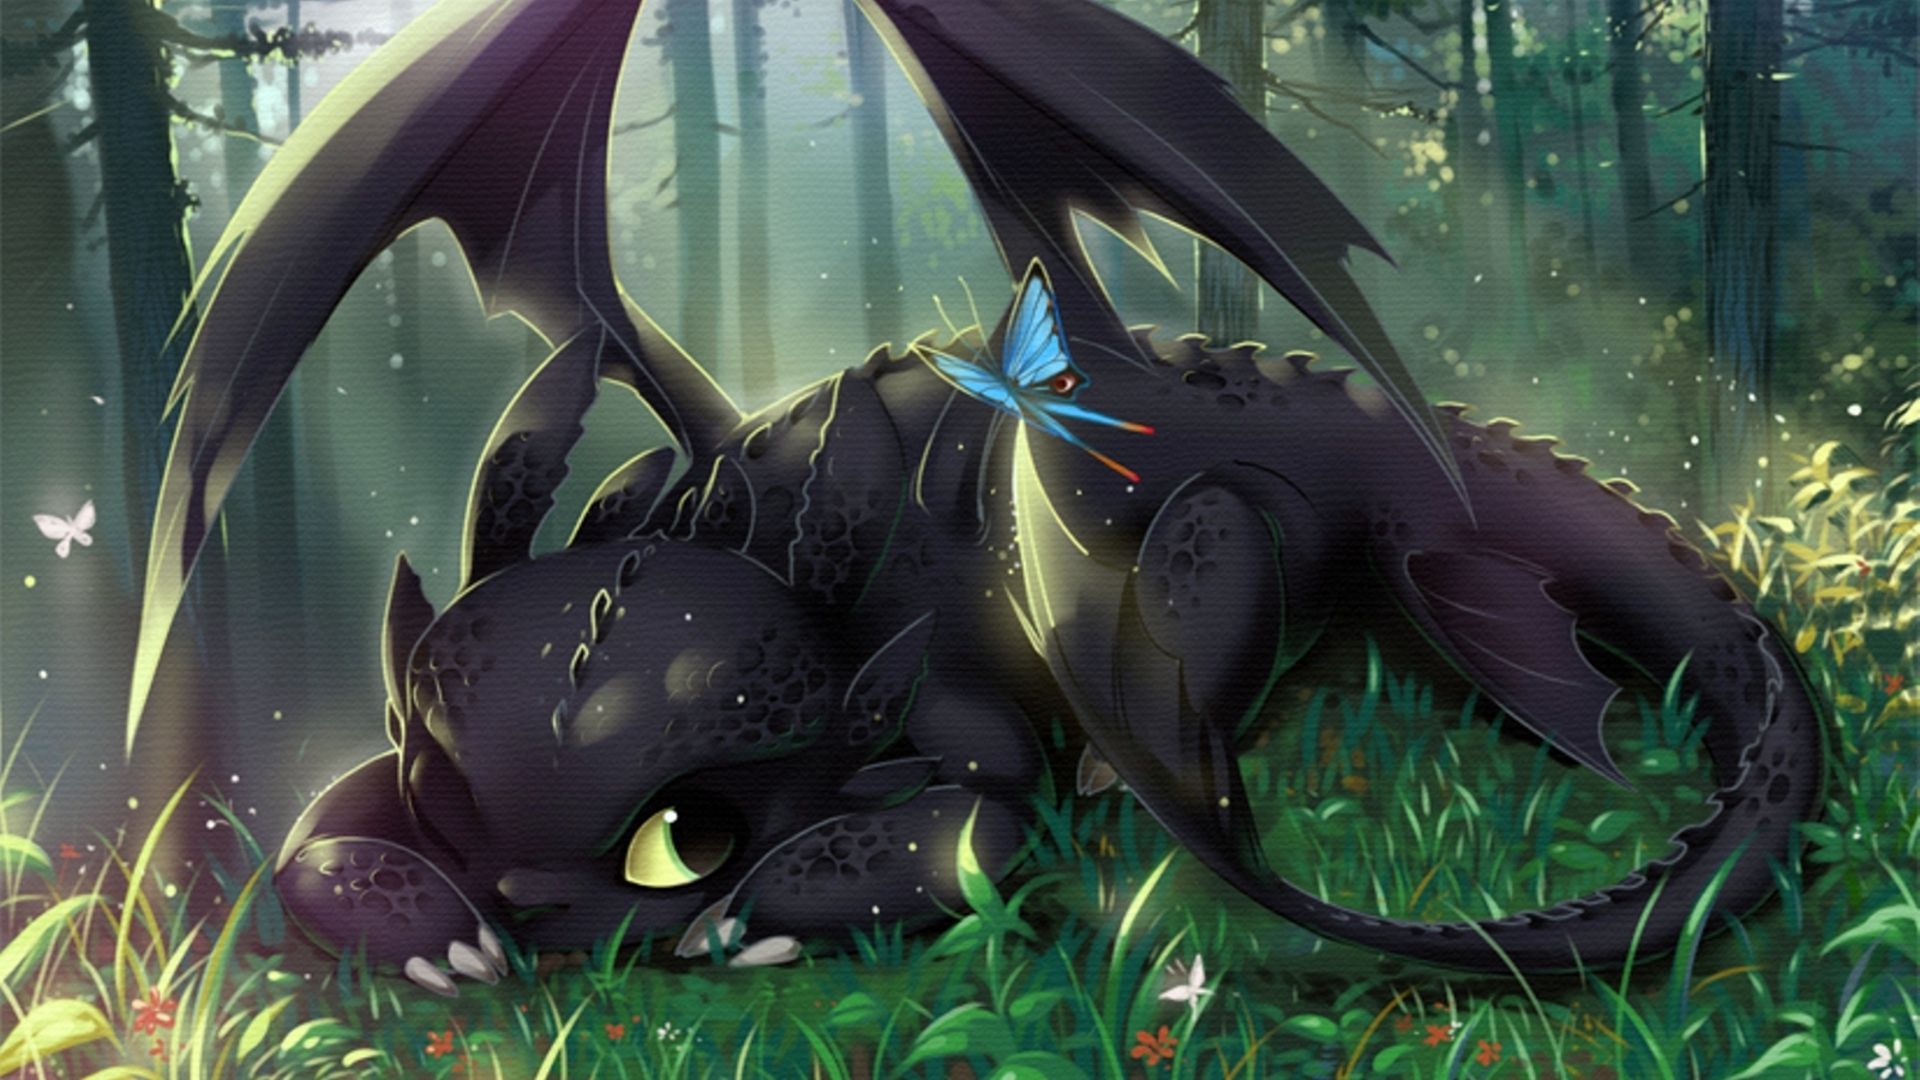 Download Cute Toothless From Dragons Riders Of Berk Wallpaper | Wallpapers .com